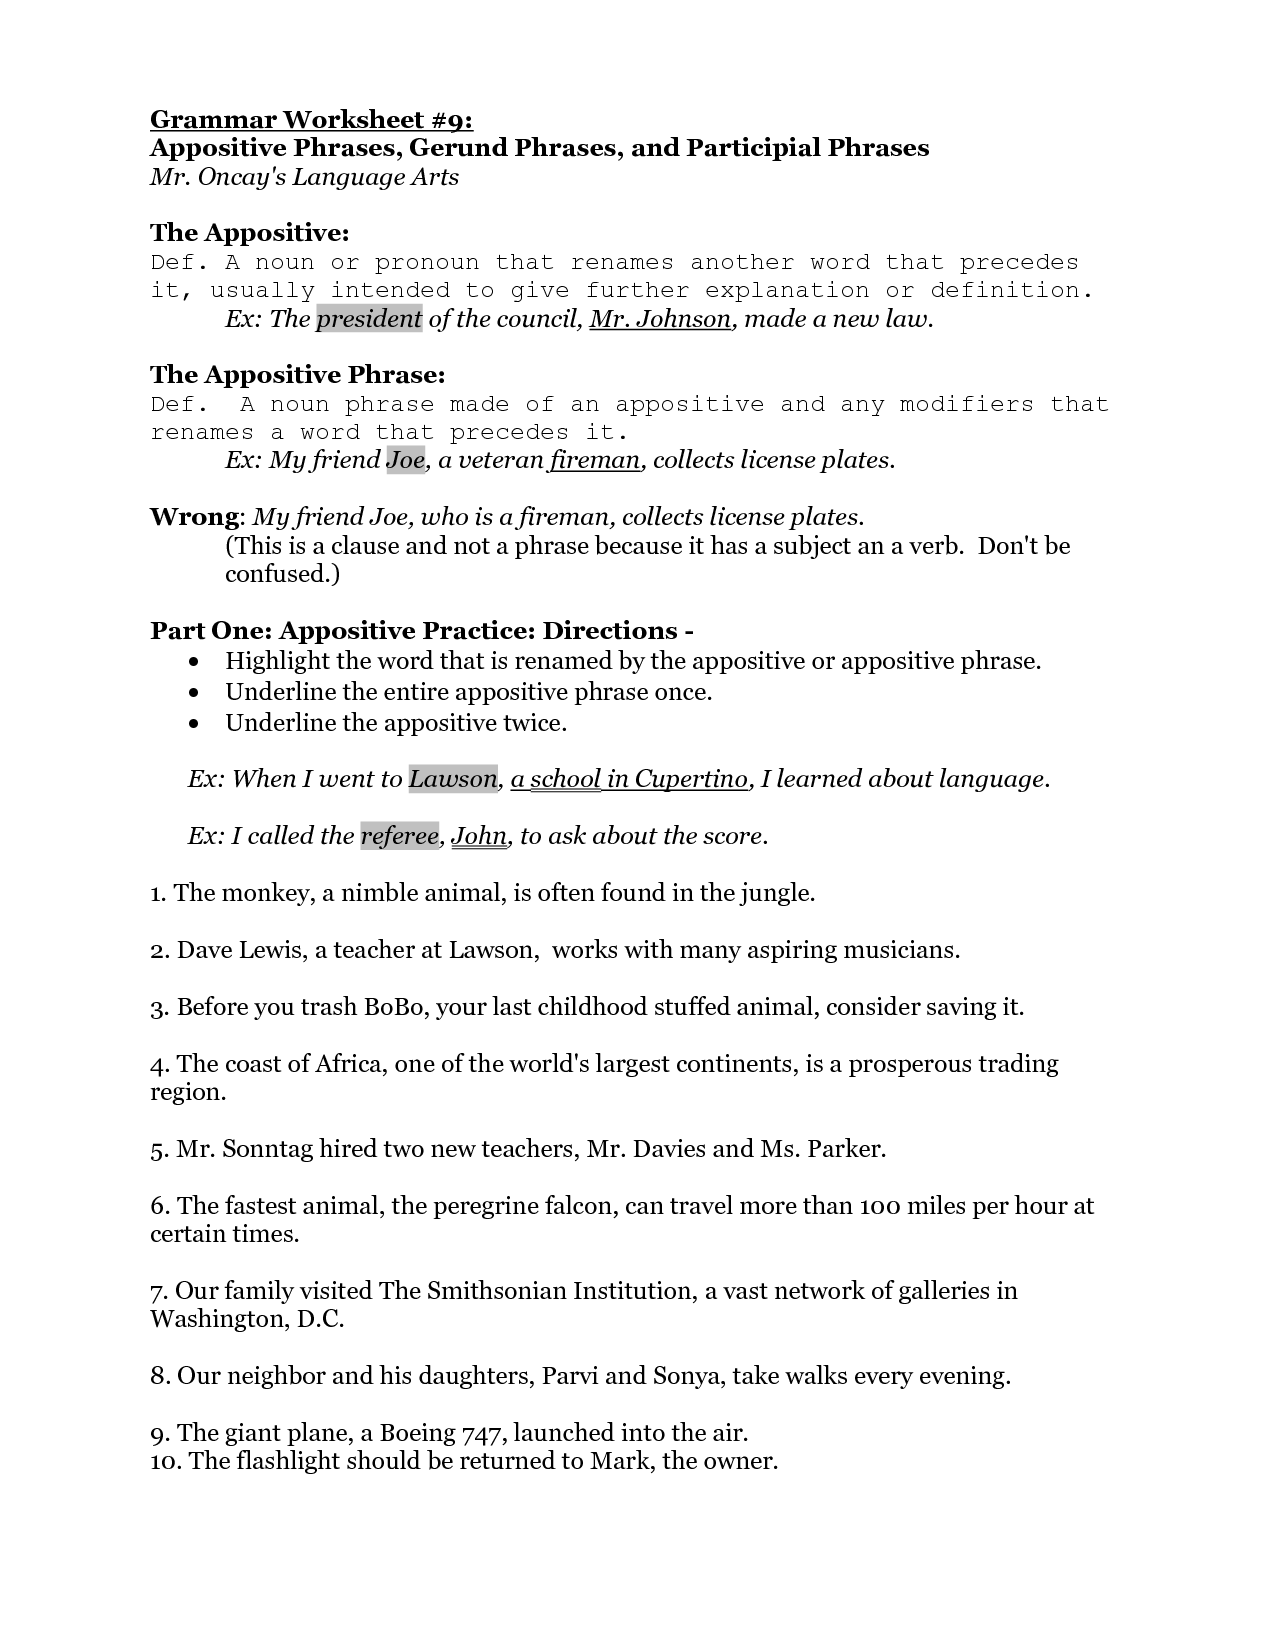 participles-and-participial-phrases-worksheet